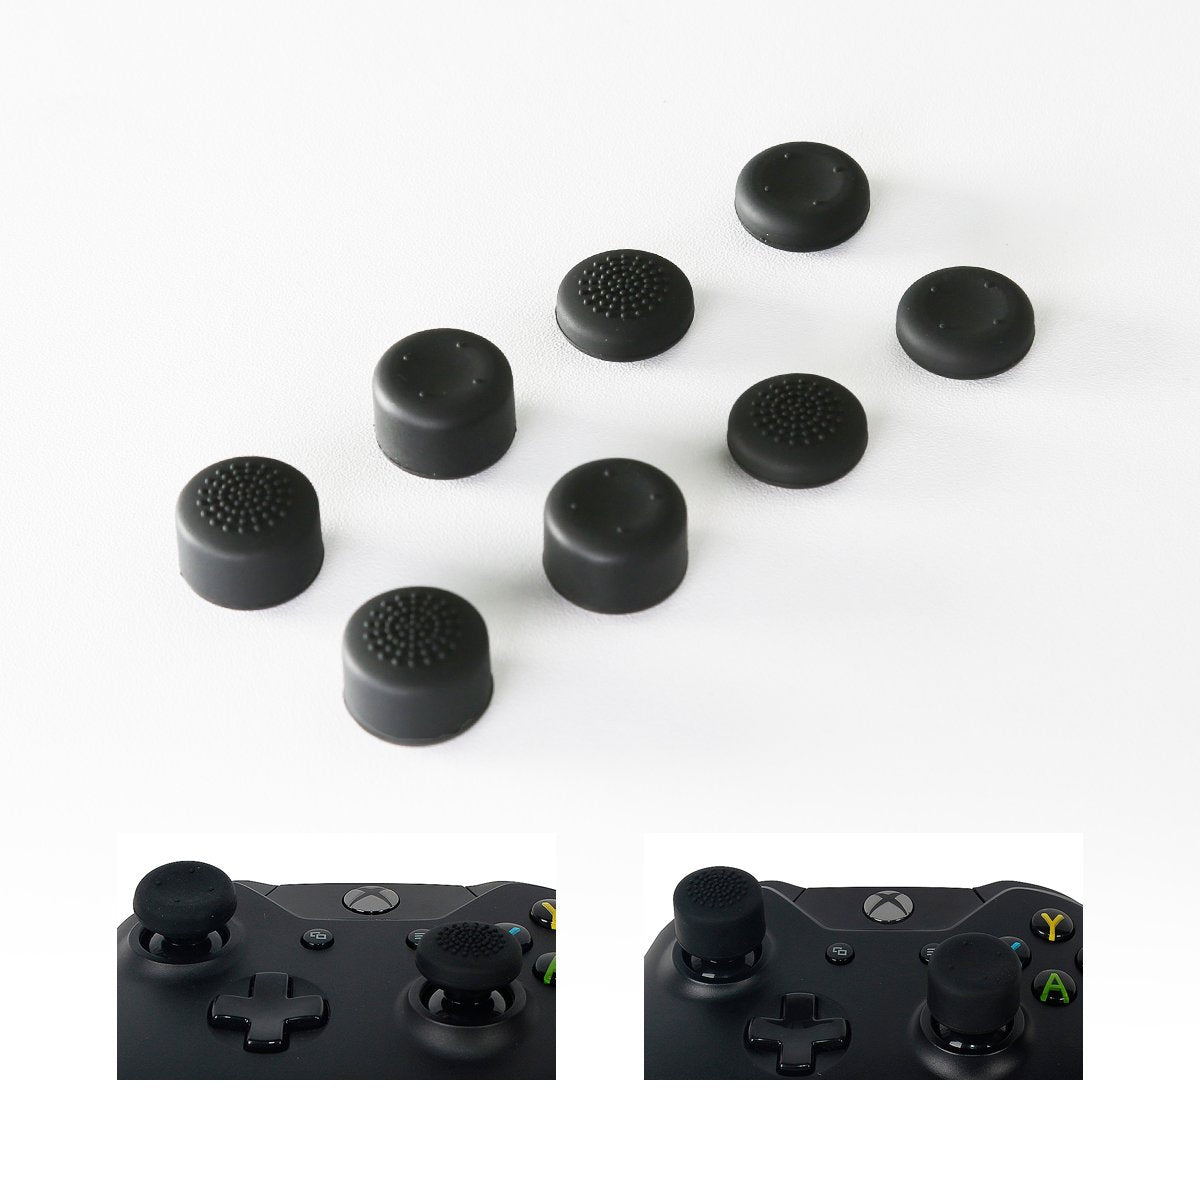 GameSir Thumb Grip Pack Joystick Covers Caps for Xbox One / Xbox One S ...